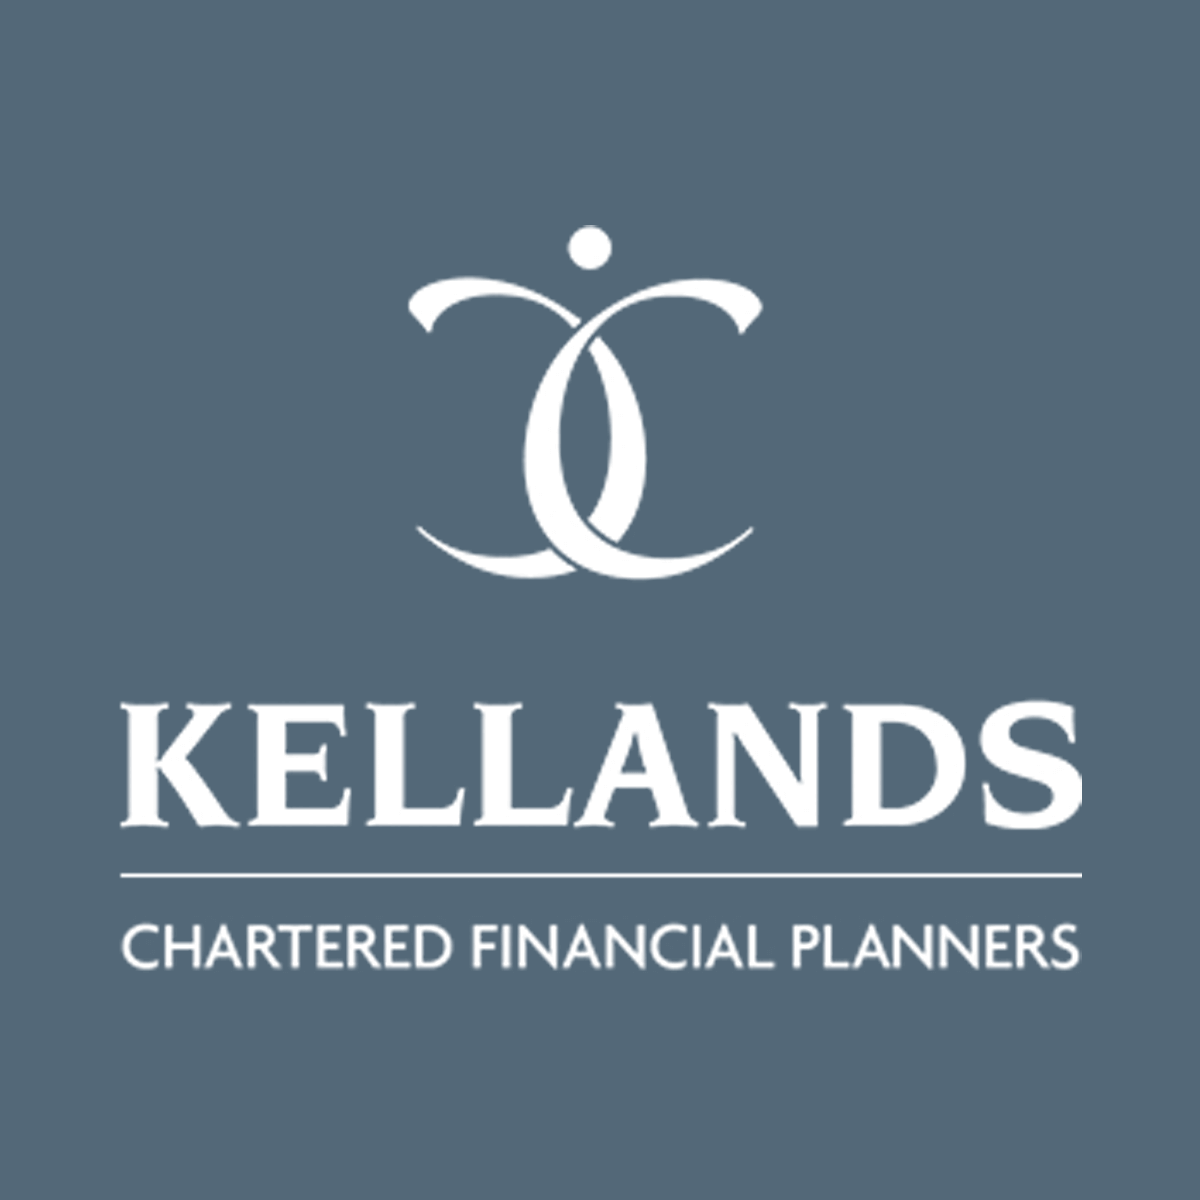 Don't forget your tickets for this Thursday's breakfast matters, where Paul Edwards from Kellands has organised a great speaker. Book via our eventbrite link below; eventbrite.co.uk/e/april-breakf… #breakfastmatters #speaker #april #ticketsavailable